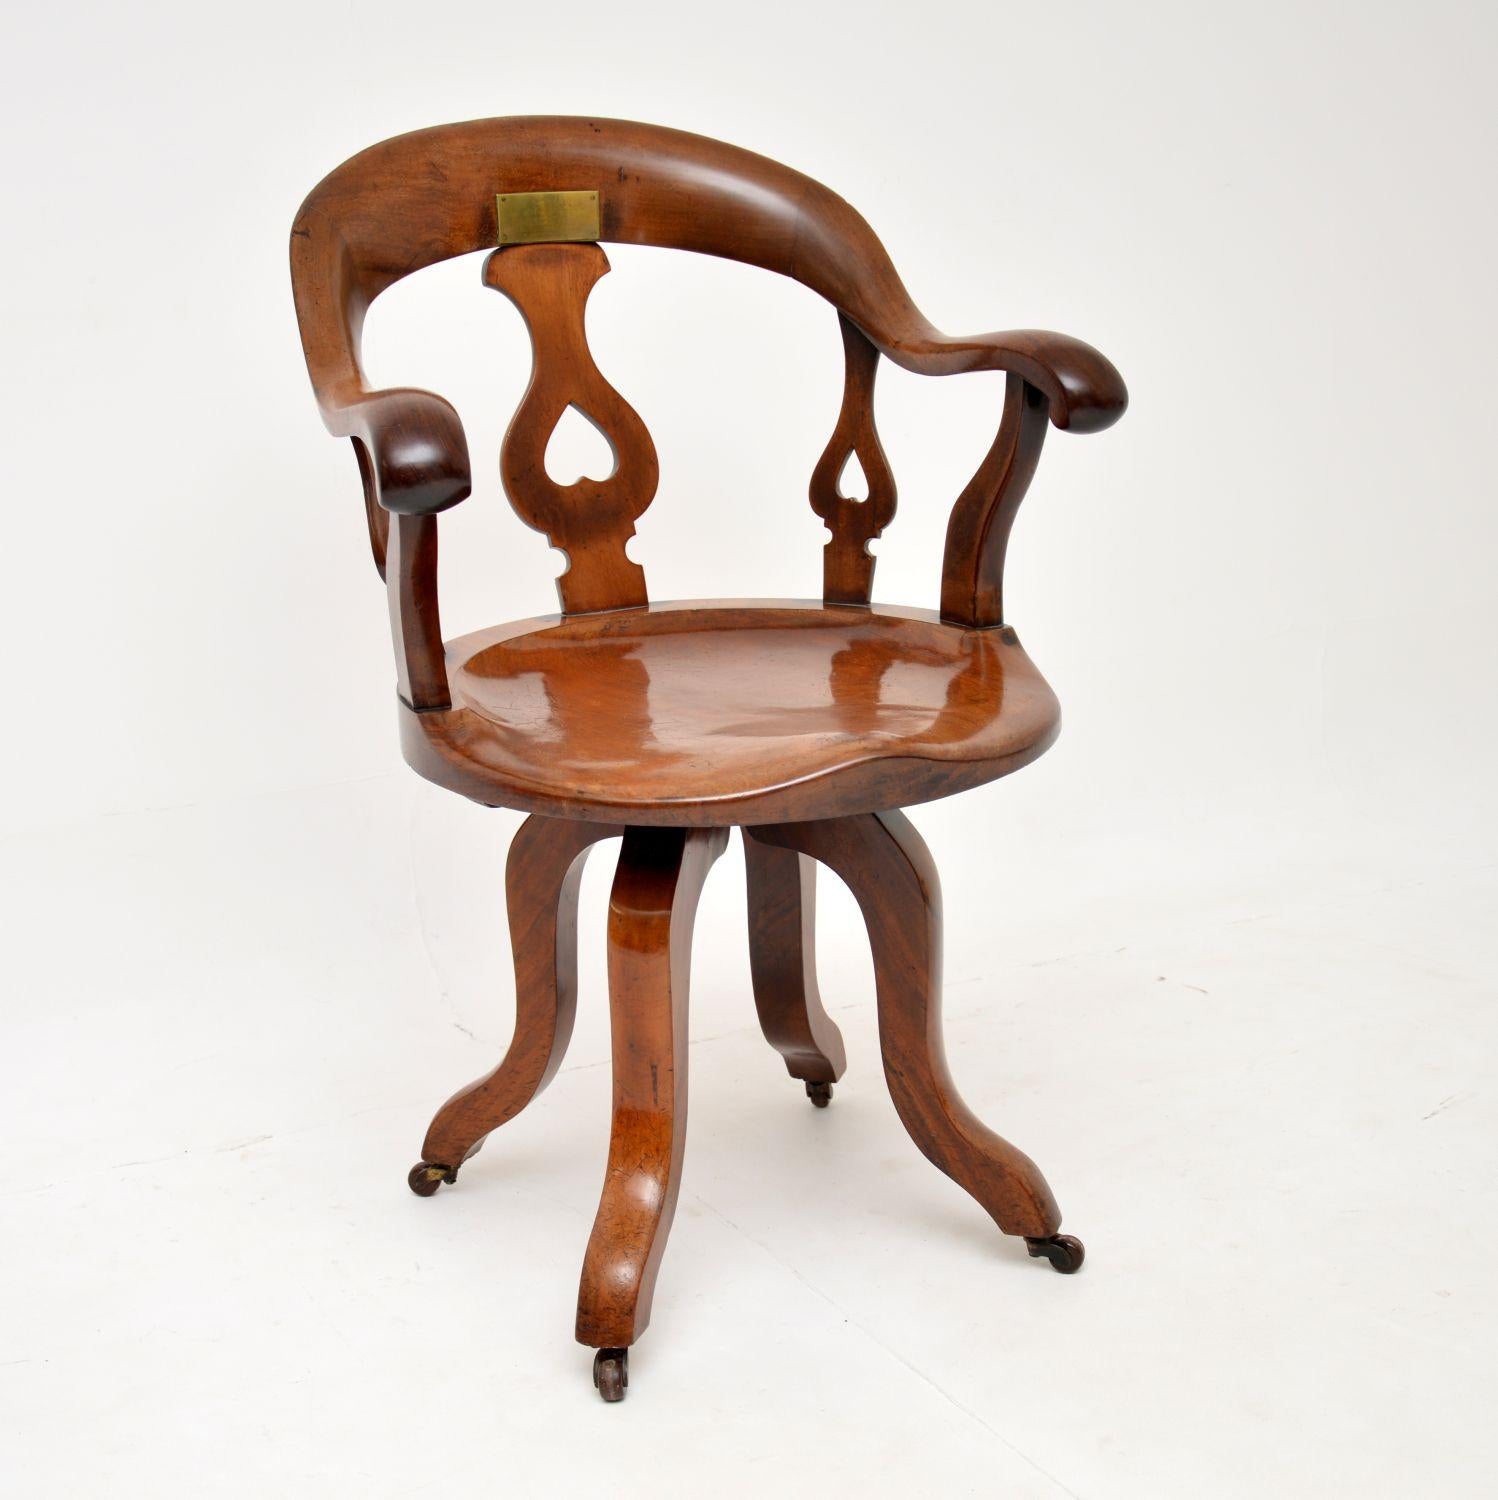 A superb original antique Victorian period swivel desk chair. This has a strong arts and crafts influence, it dates from the 1880’s.

In fact, this very interesting piece has an original brass plaque on the back rest, from when it was presented as